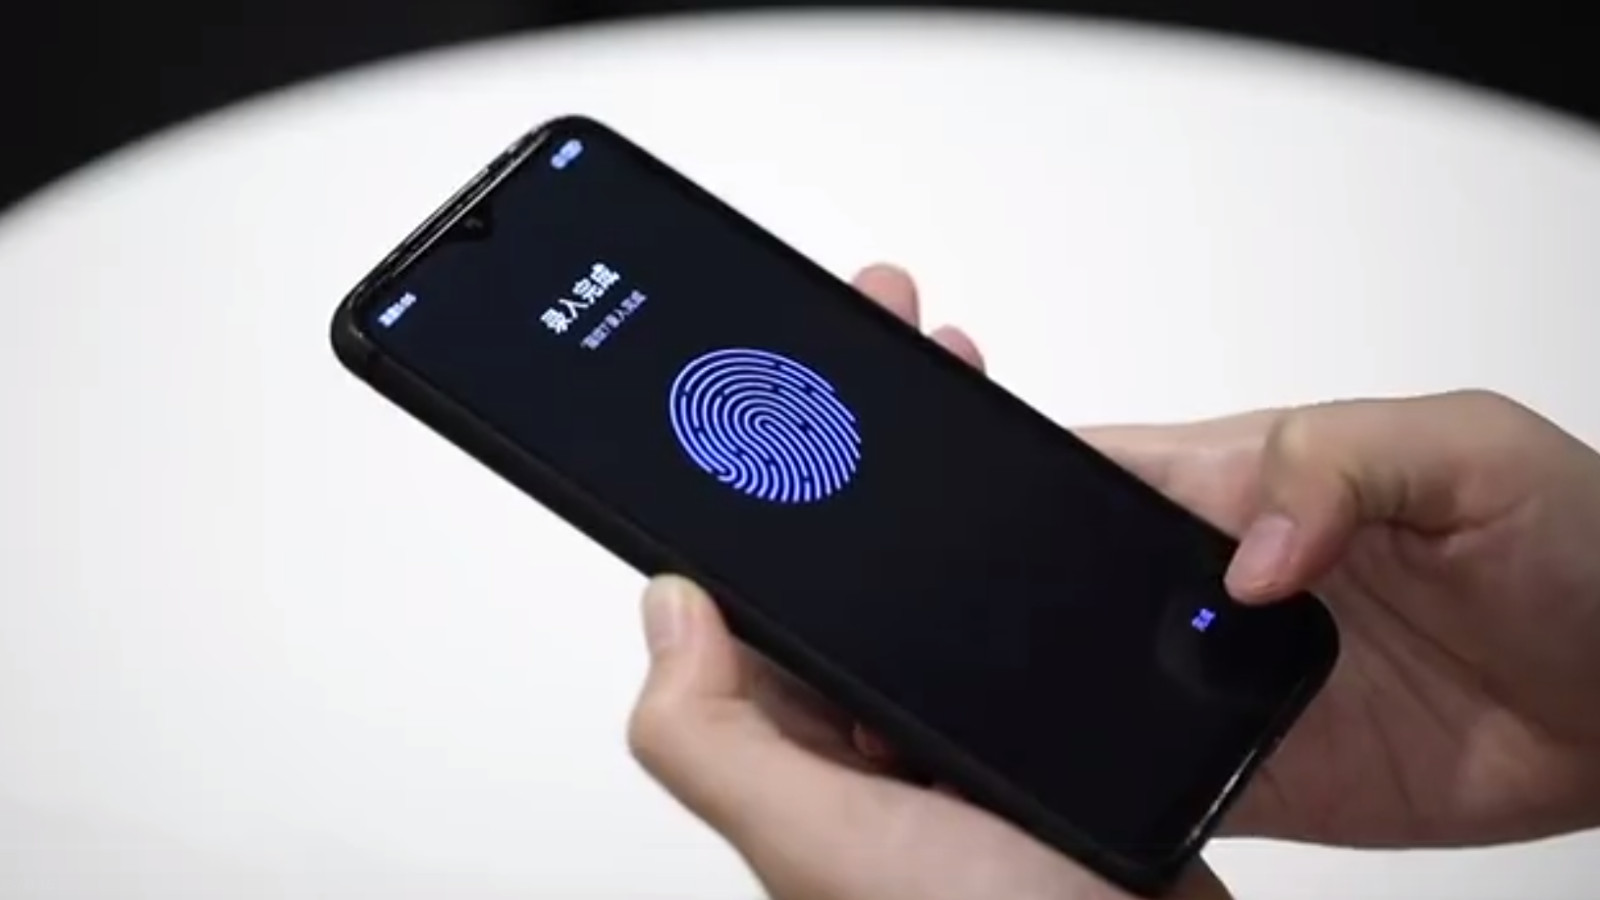 A Xiaomi Redmi phone with an in-display fingerprint sensor for LCD screens.